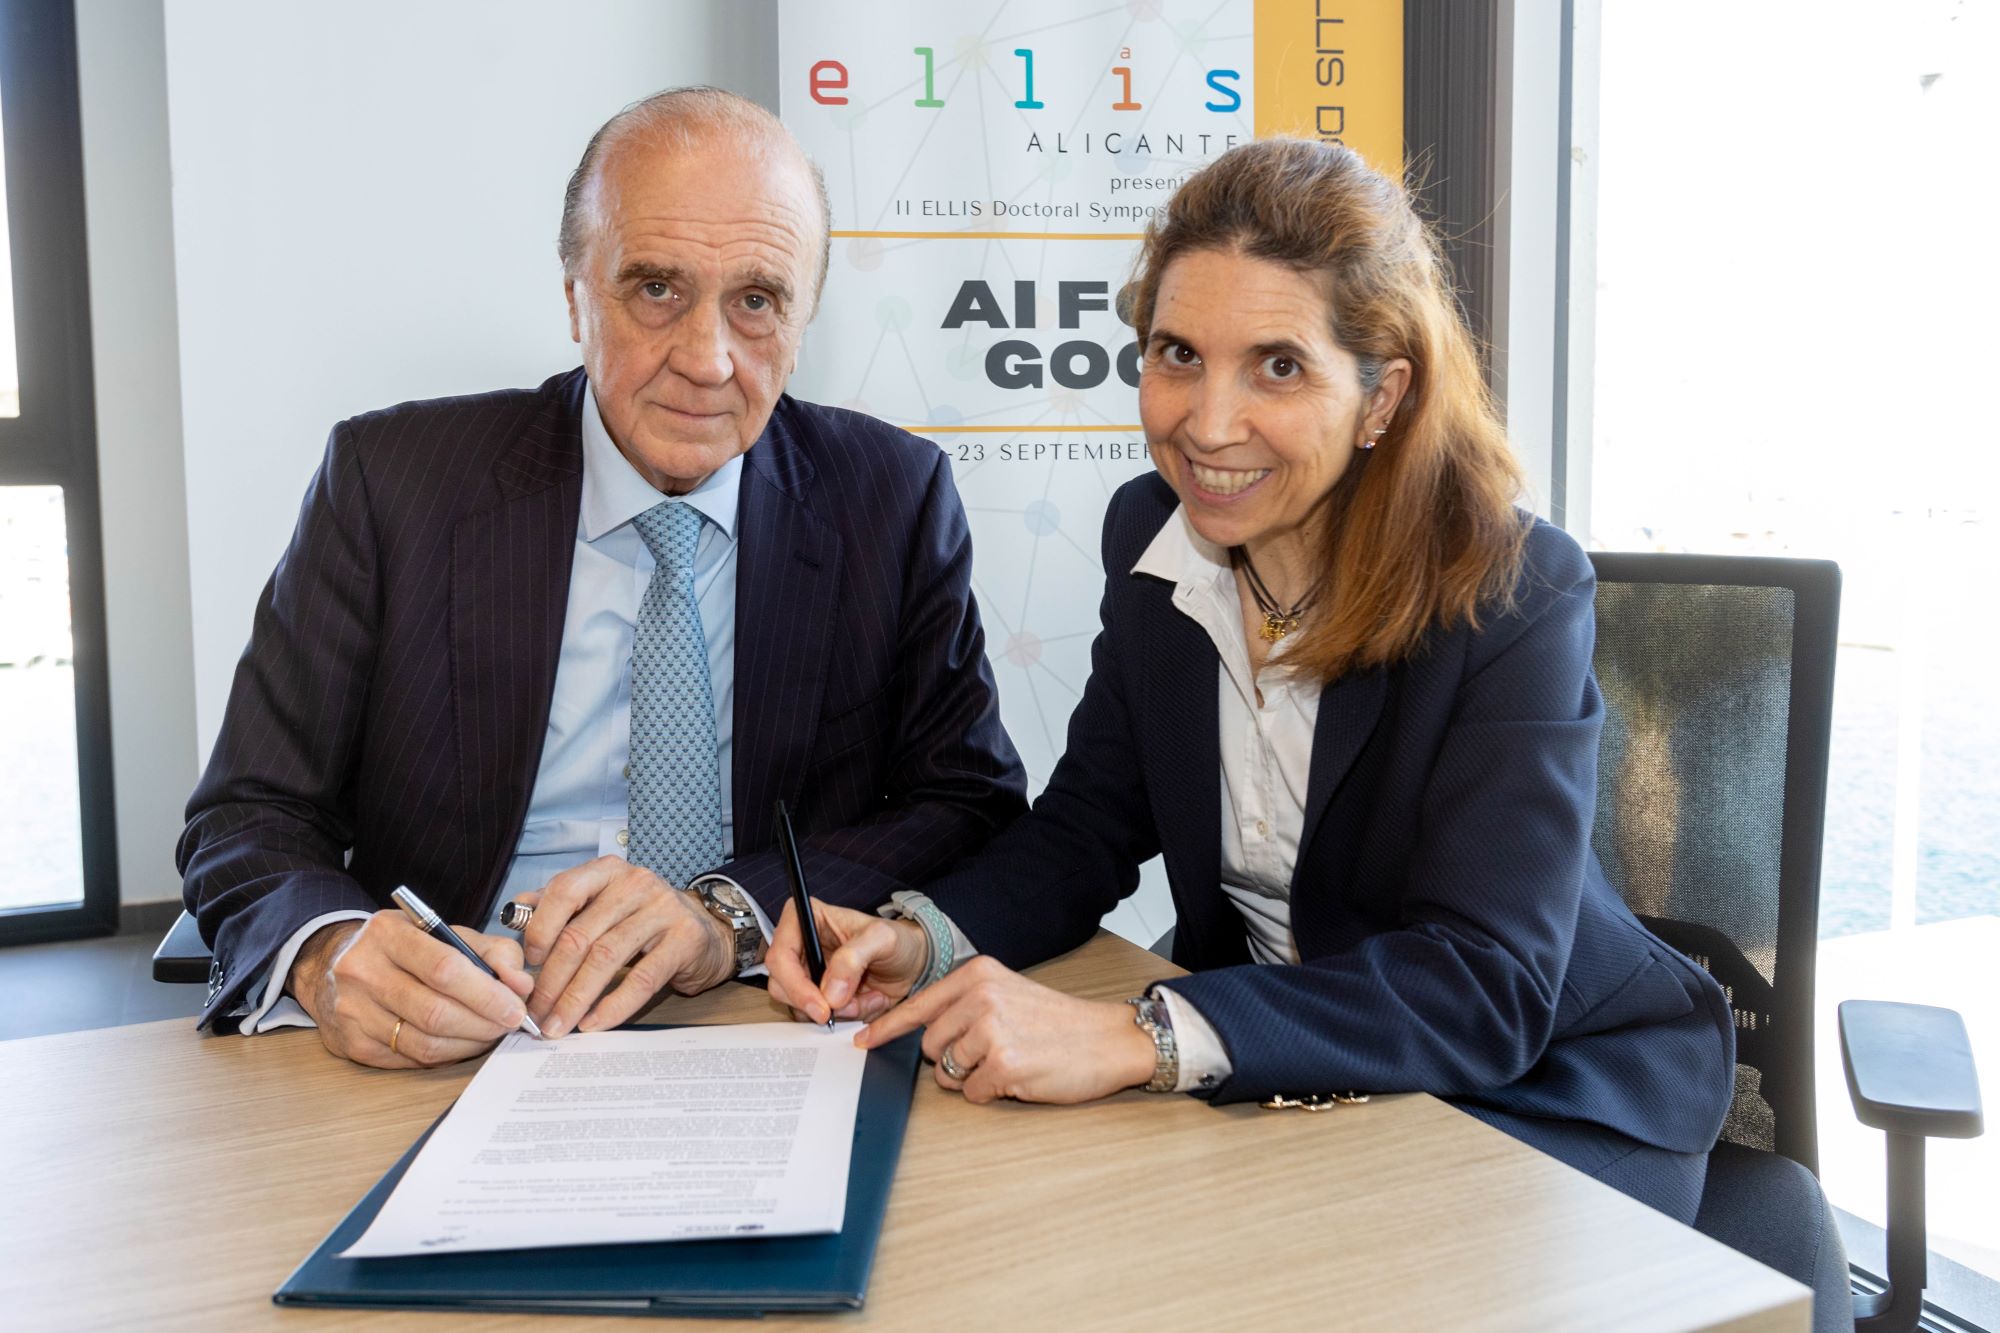 Nuria Oliver, director of ELLIS Alicante signs a collaboration agreement with Eduardo Gil, president of Nippon Gases.